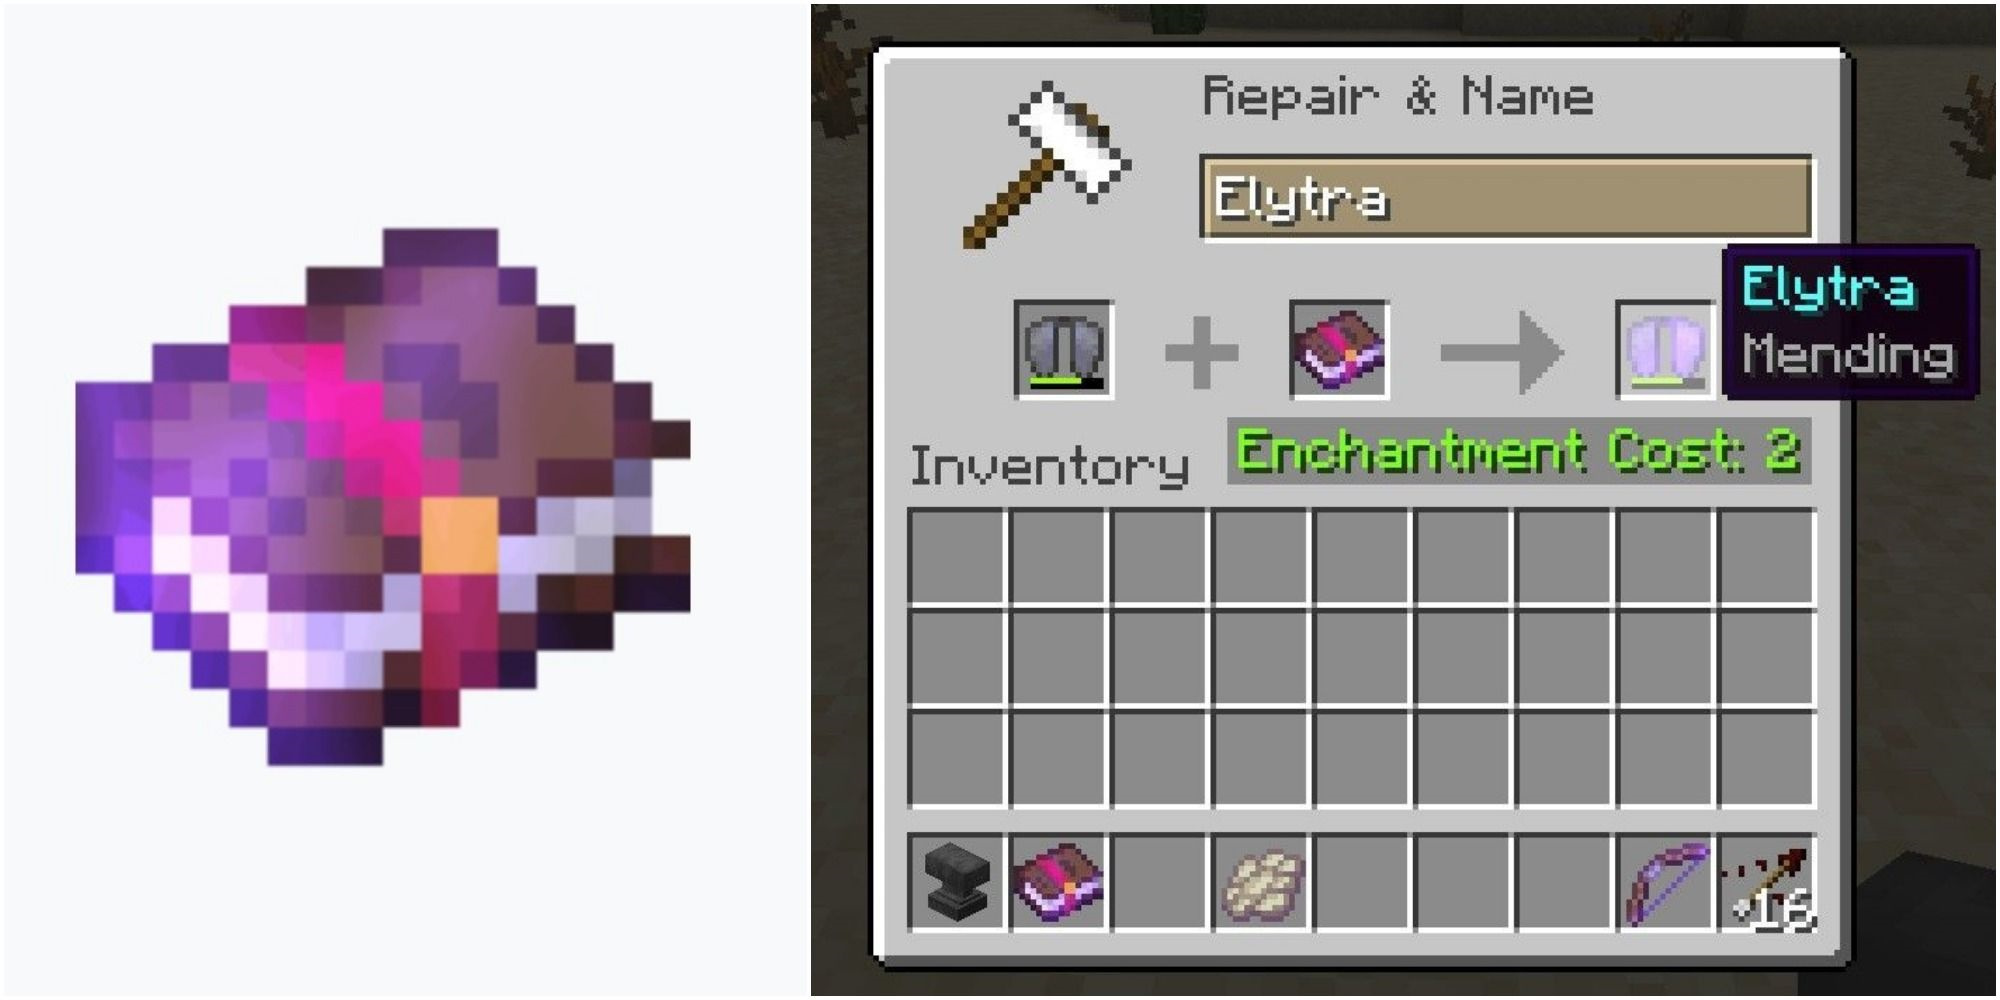 how to use enchanted books in minecraft